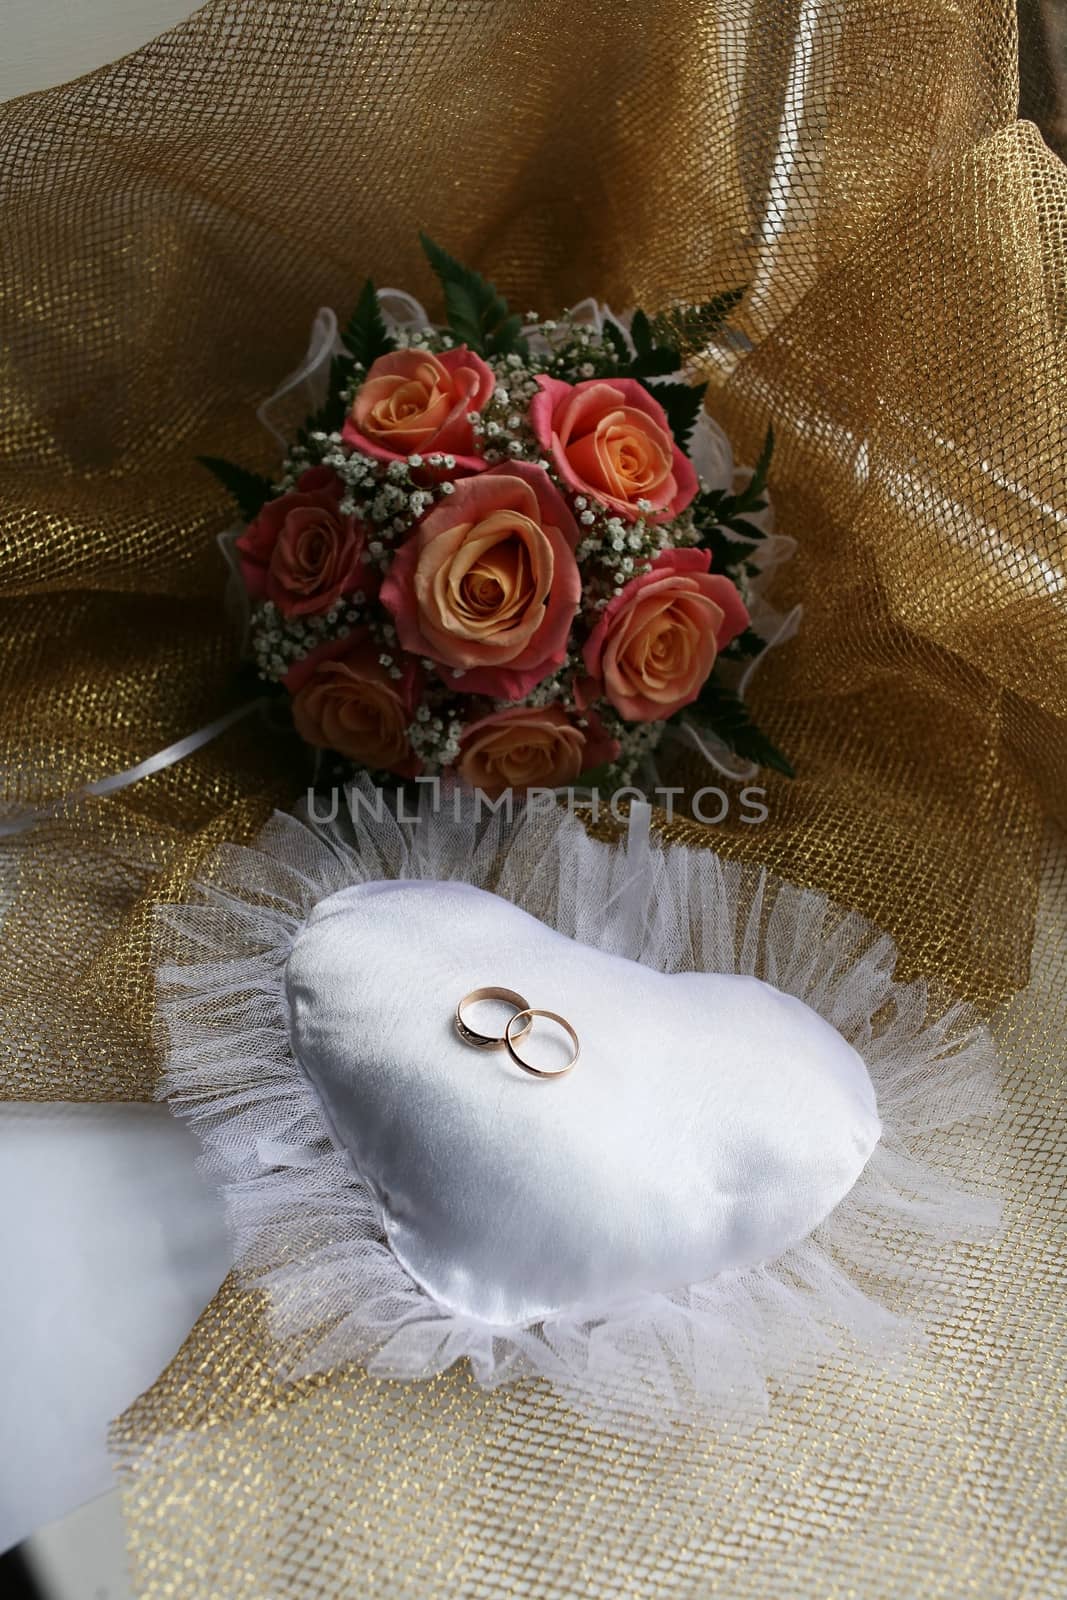 Wedding rings on white pillow in the form of the heart near the wedding bouquet